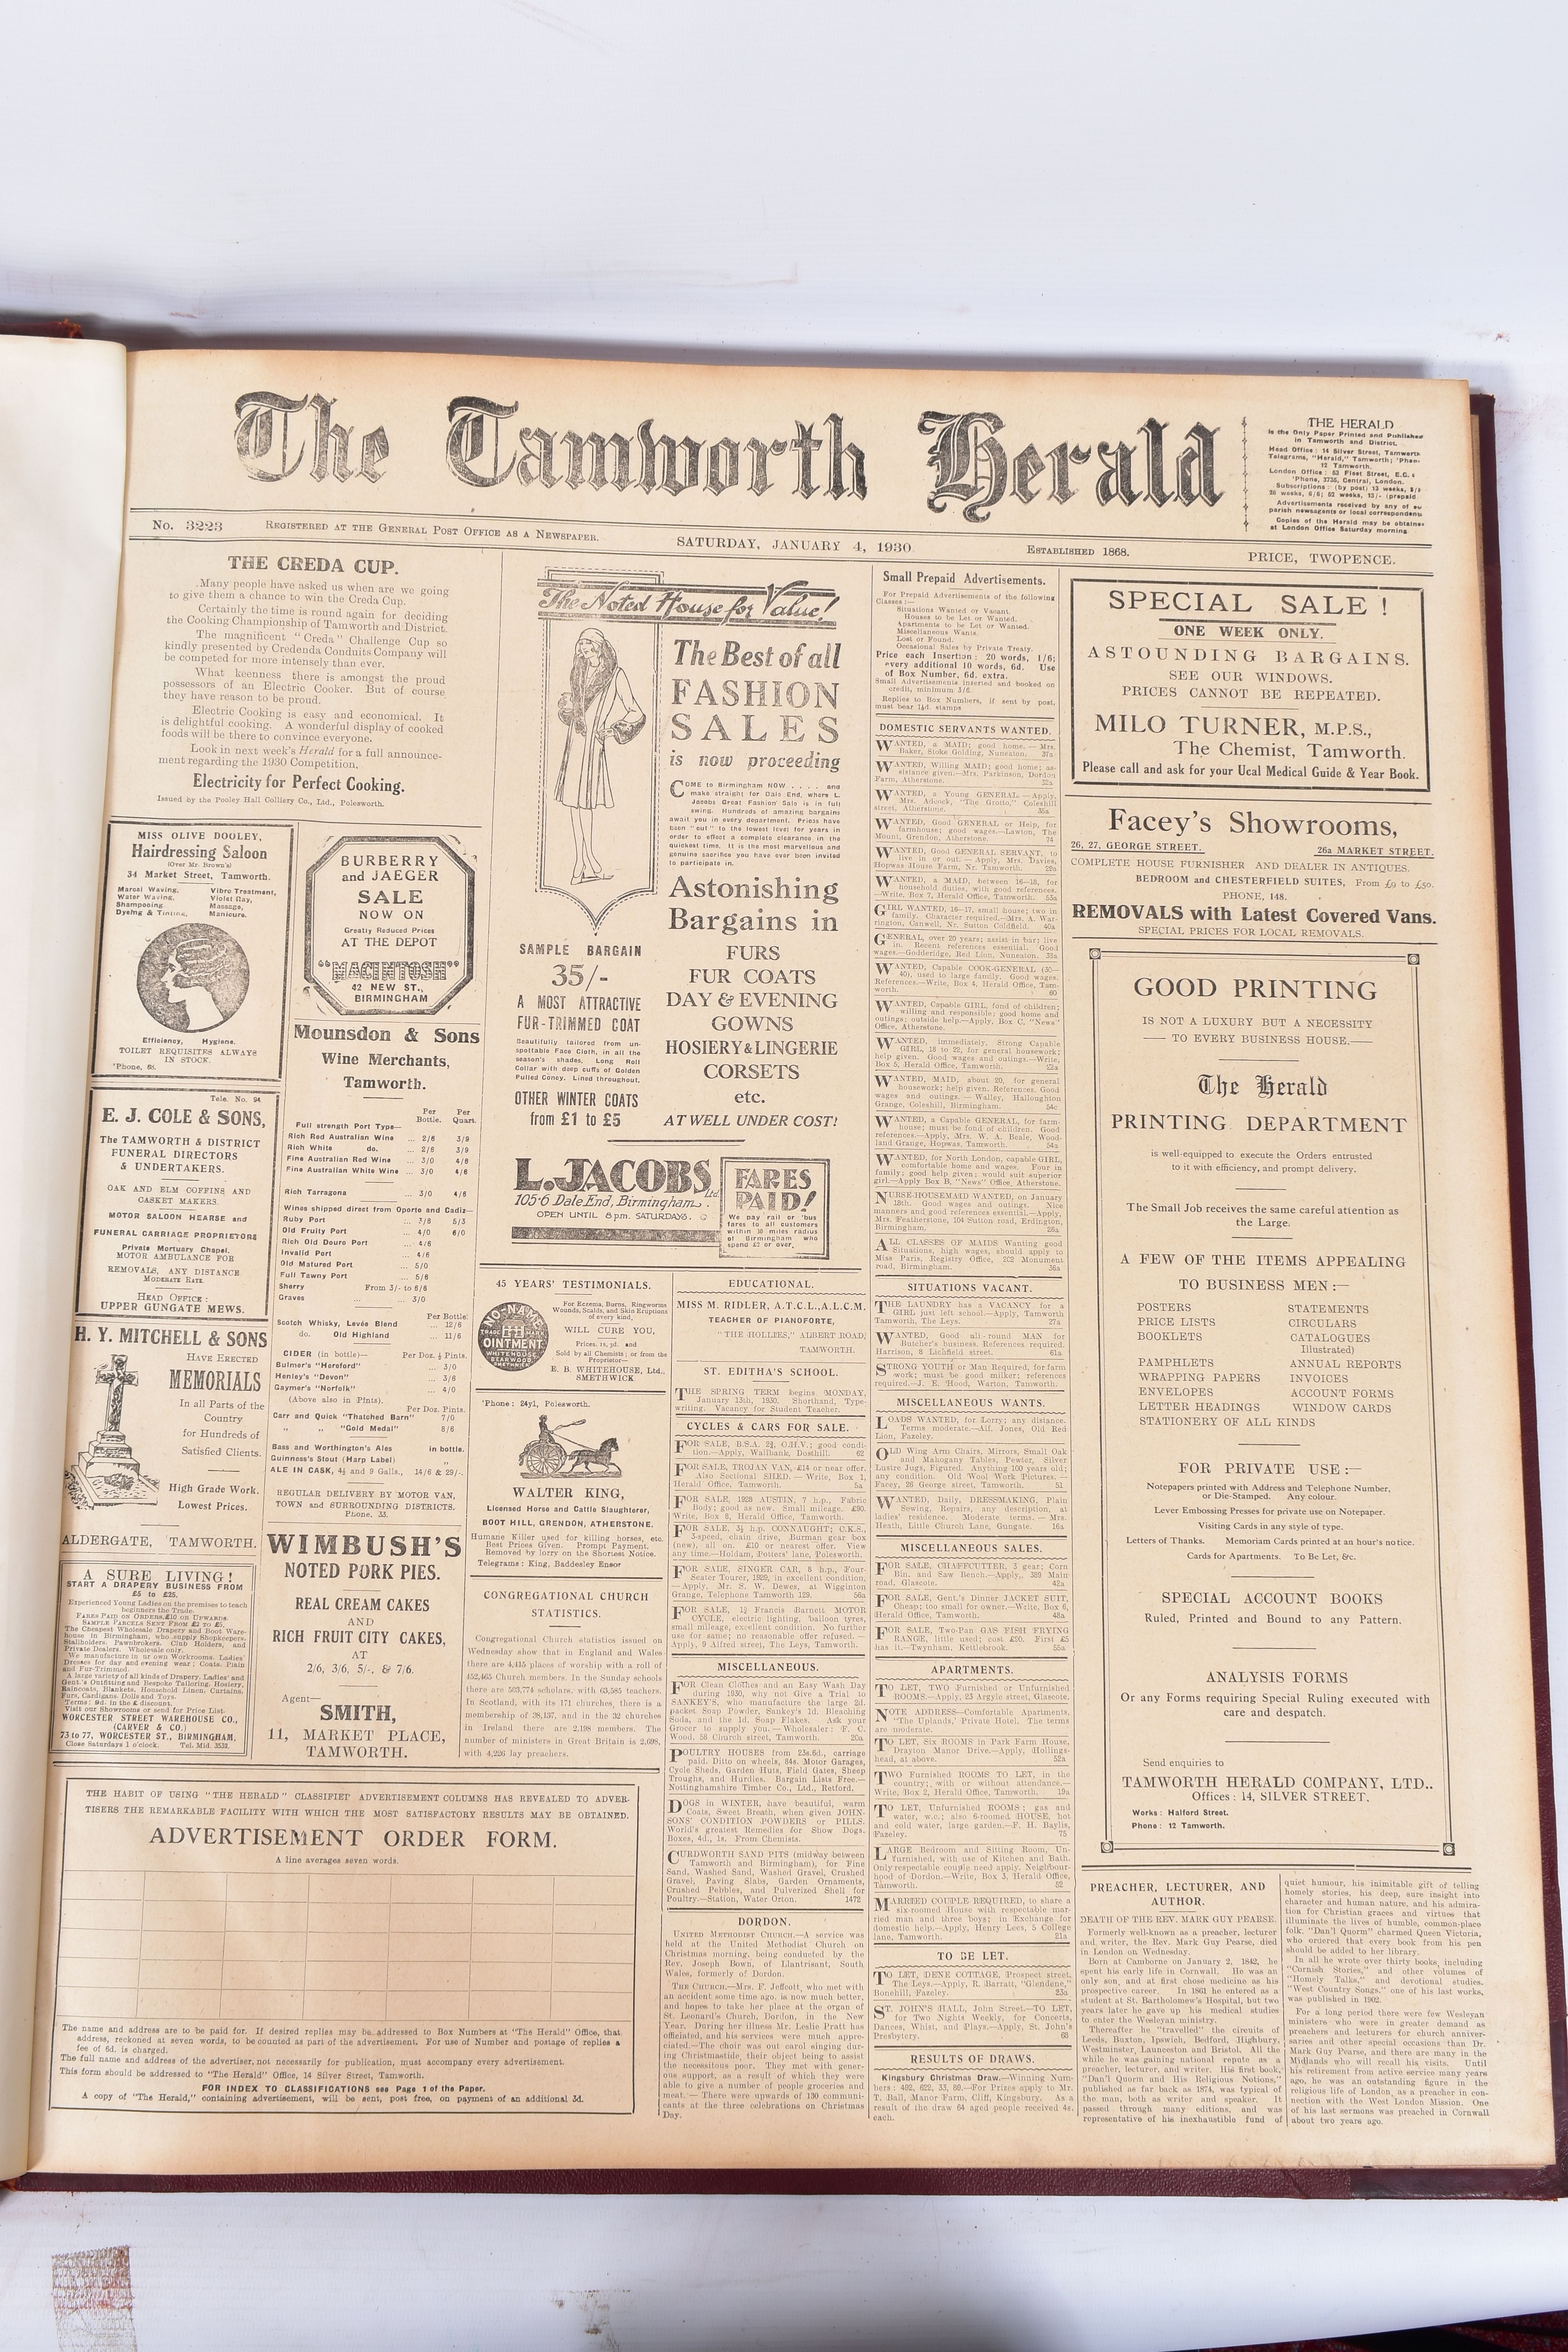 THE TAMWORTH HERALD, an Archive of the Tamworth Herald Newspaper from 1930, the newspapers are bound